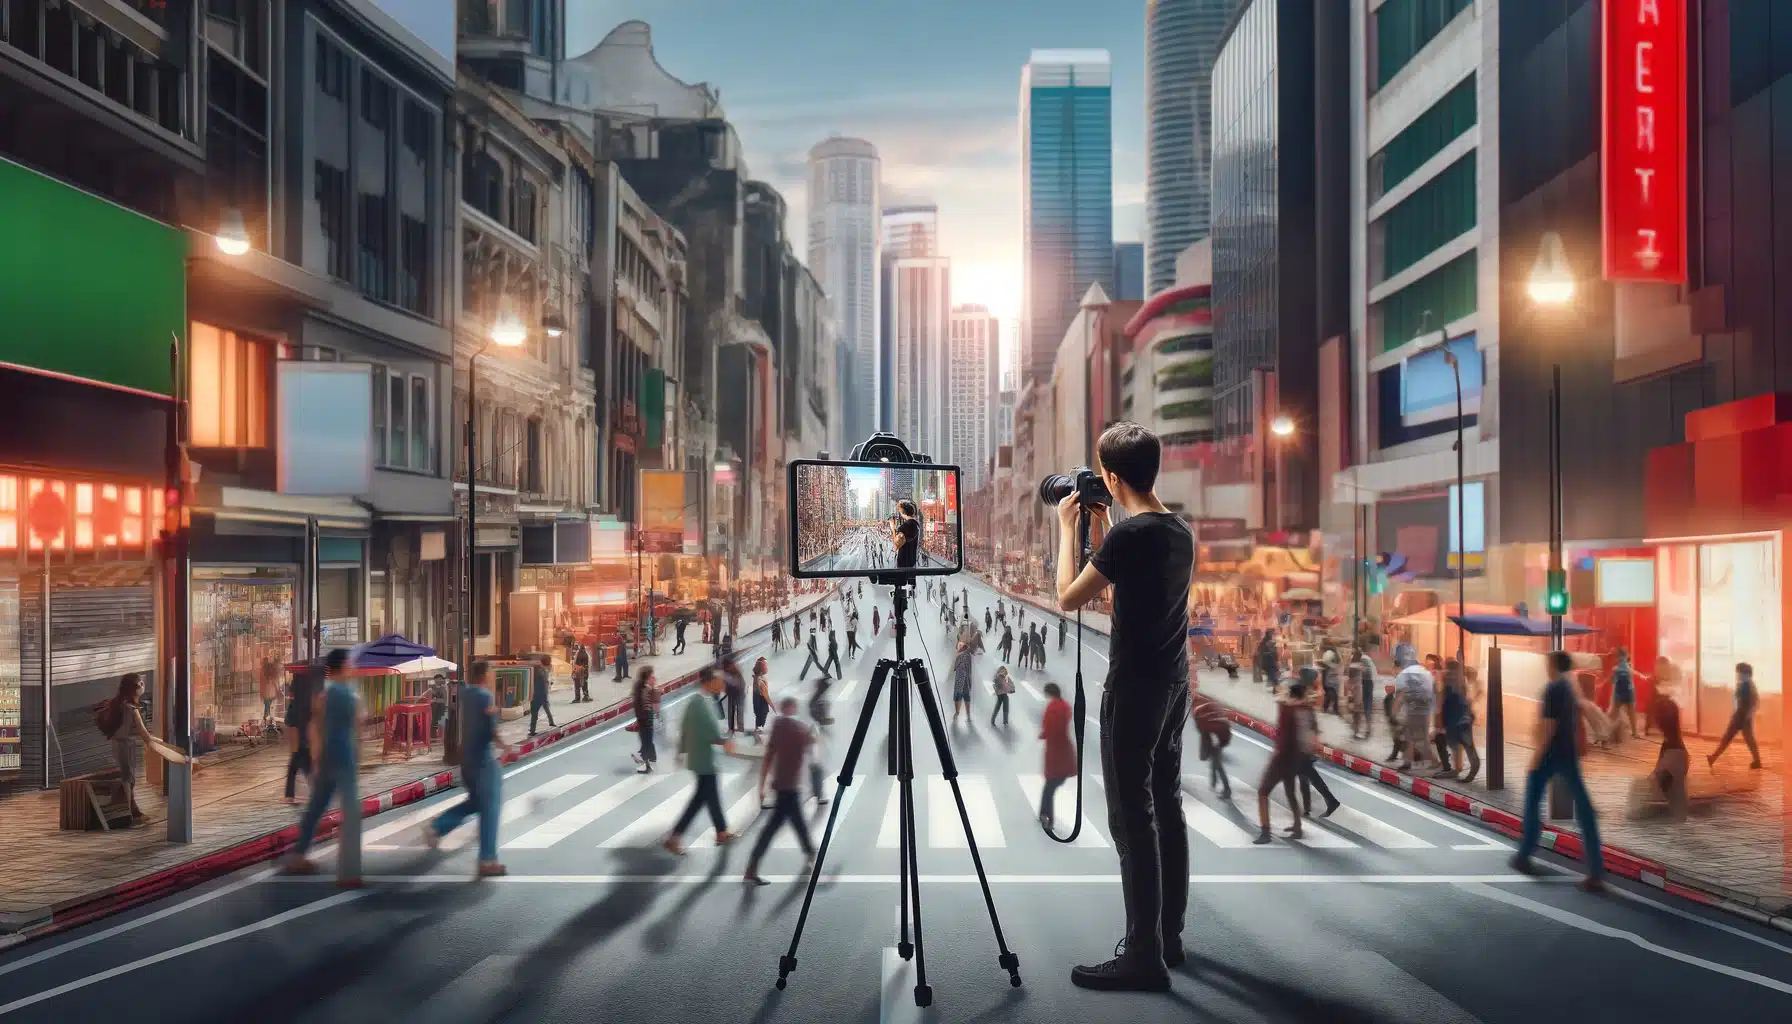 Photographer sets up a self-portrait in a busy city street using a tripod and timer, capturing the essence of urban life along with their own image.